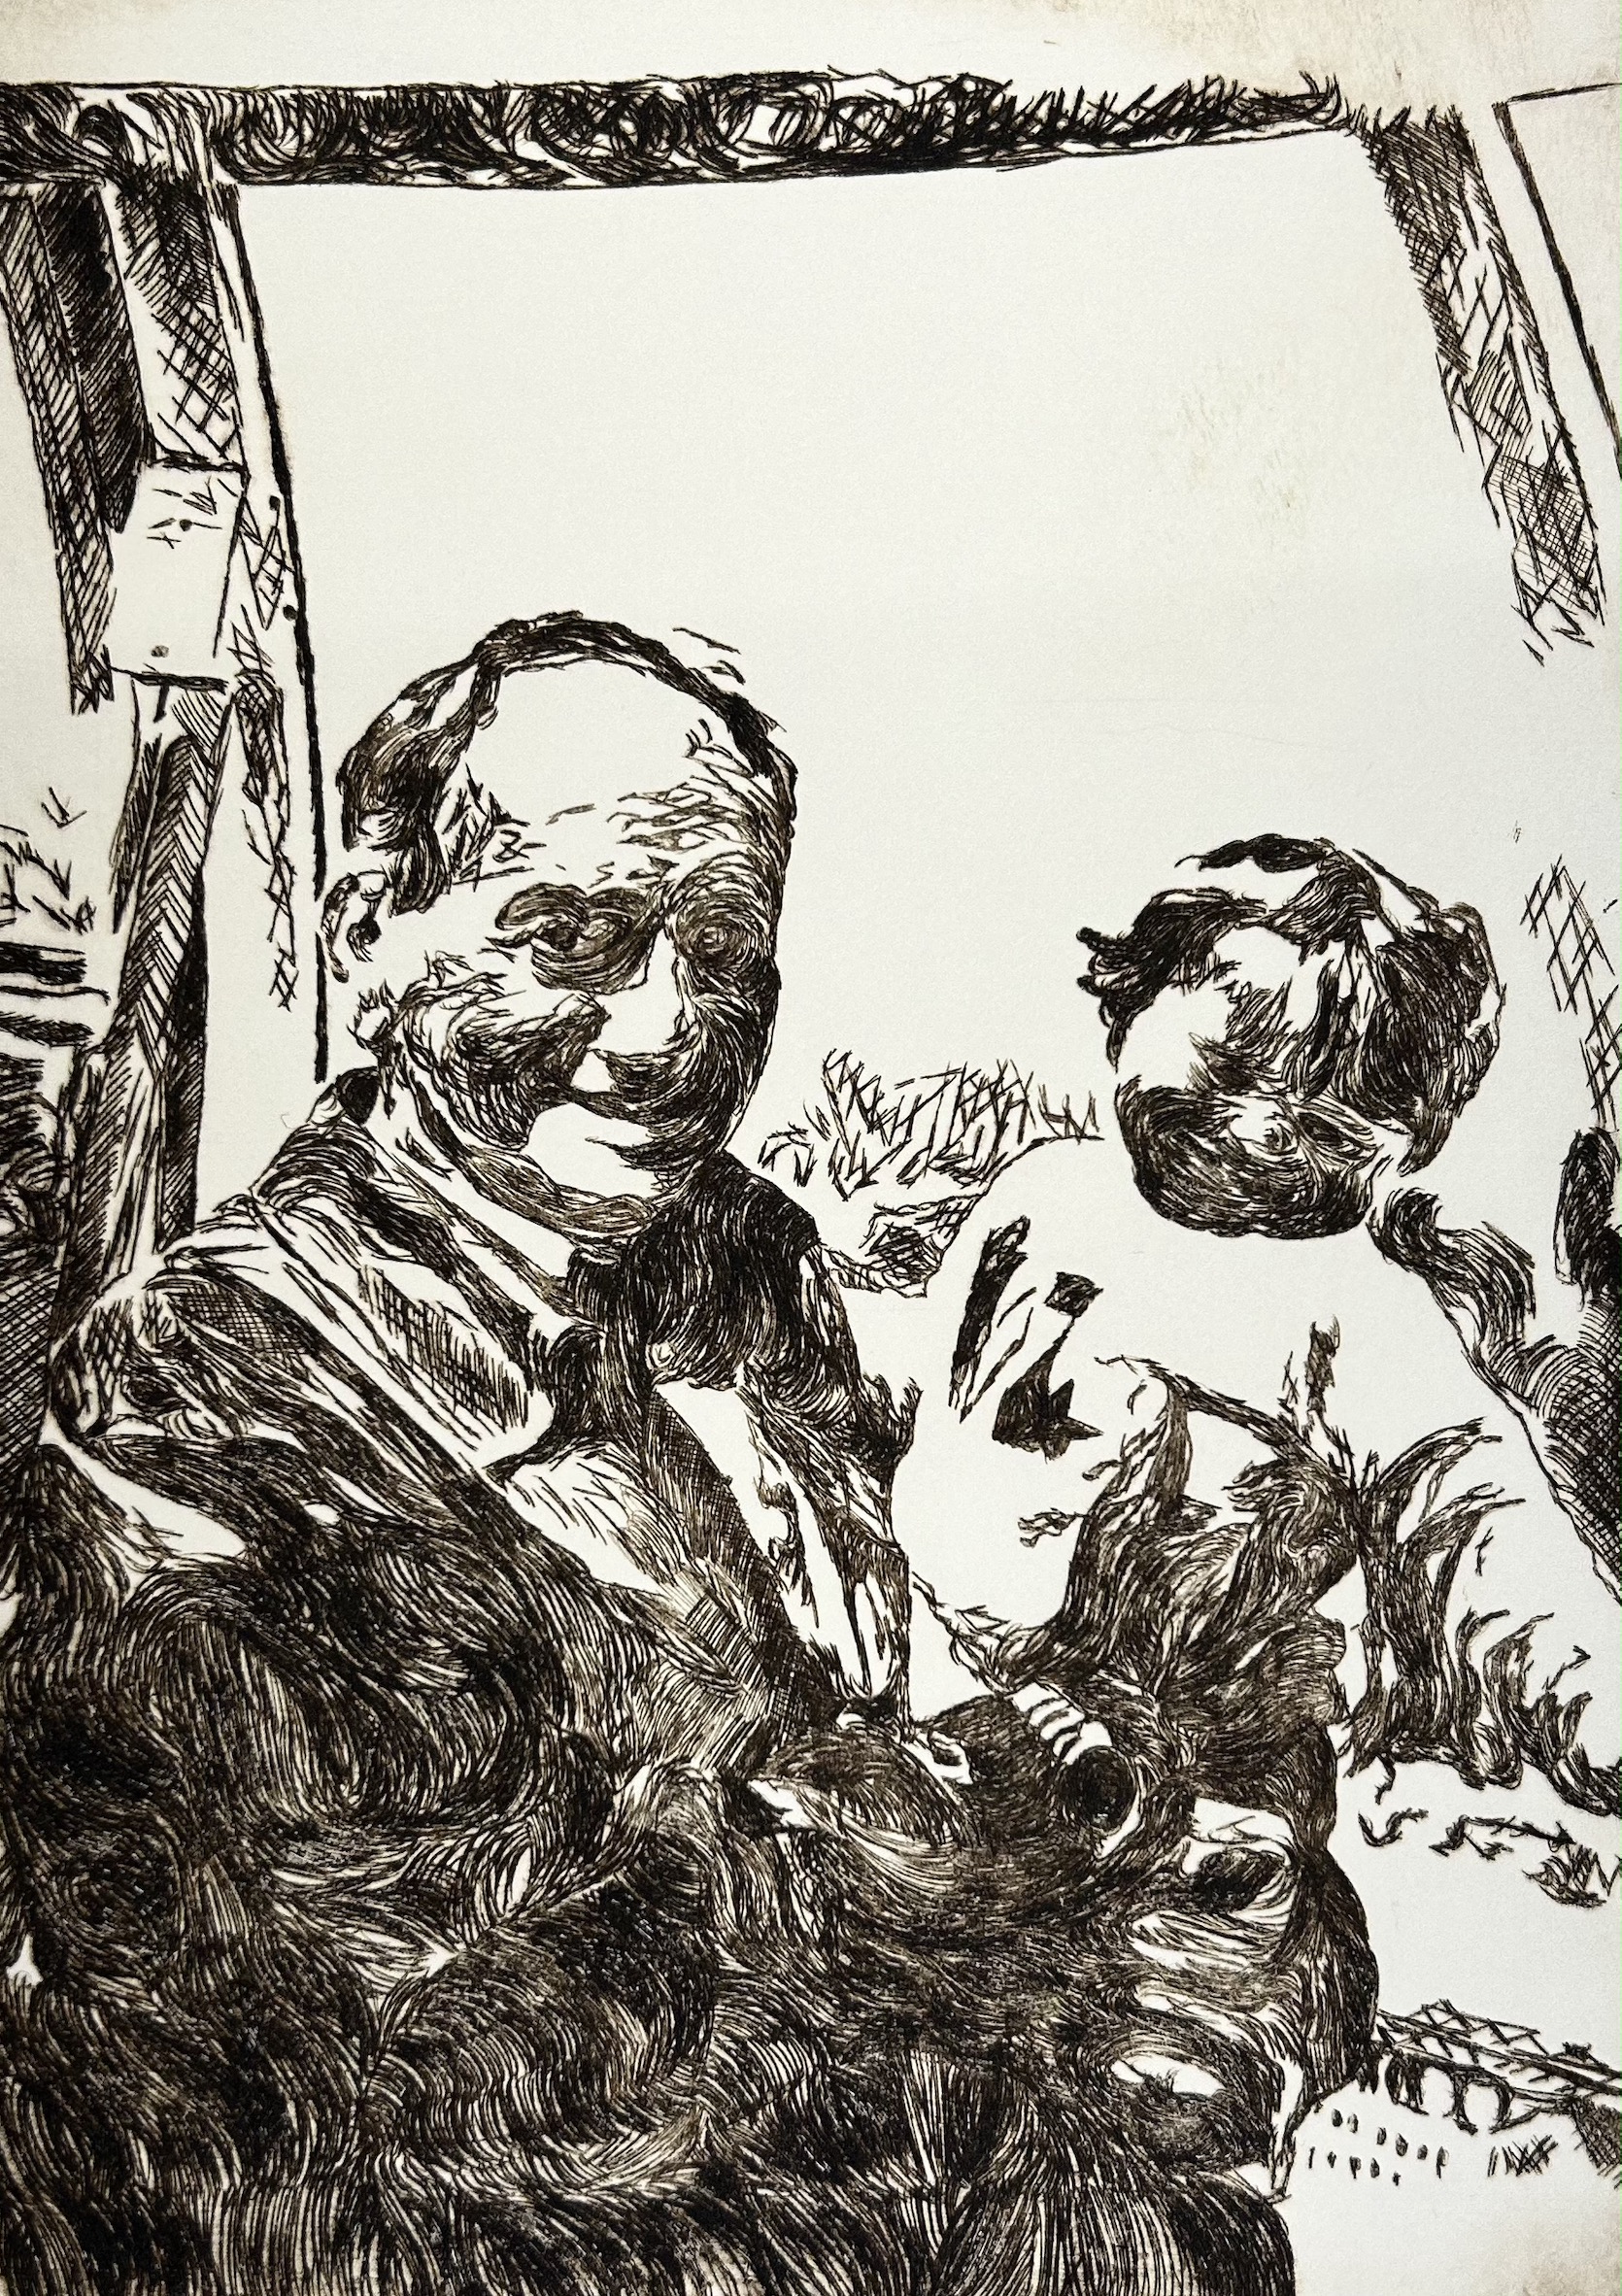 Fine Art work by Emma Bidwell showing an intricate drypoint print of her grandfather holding her younger self.